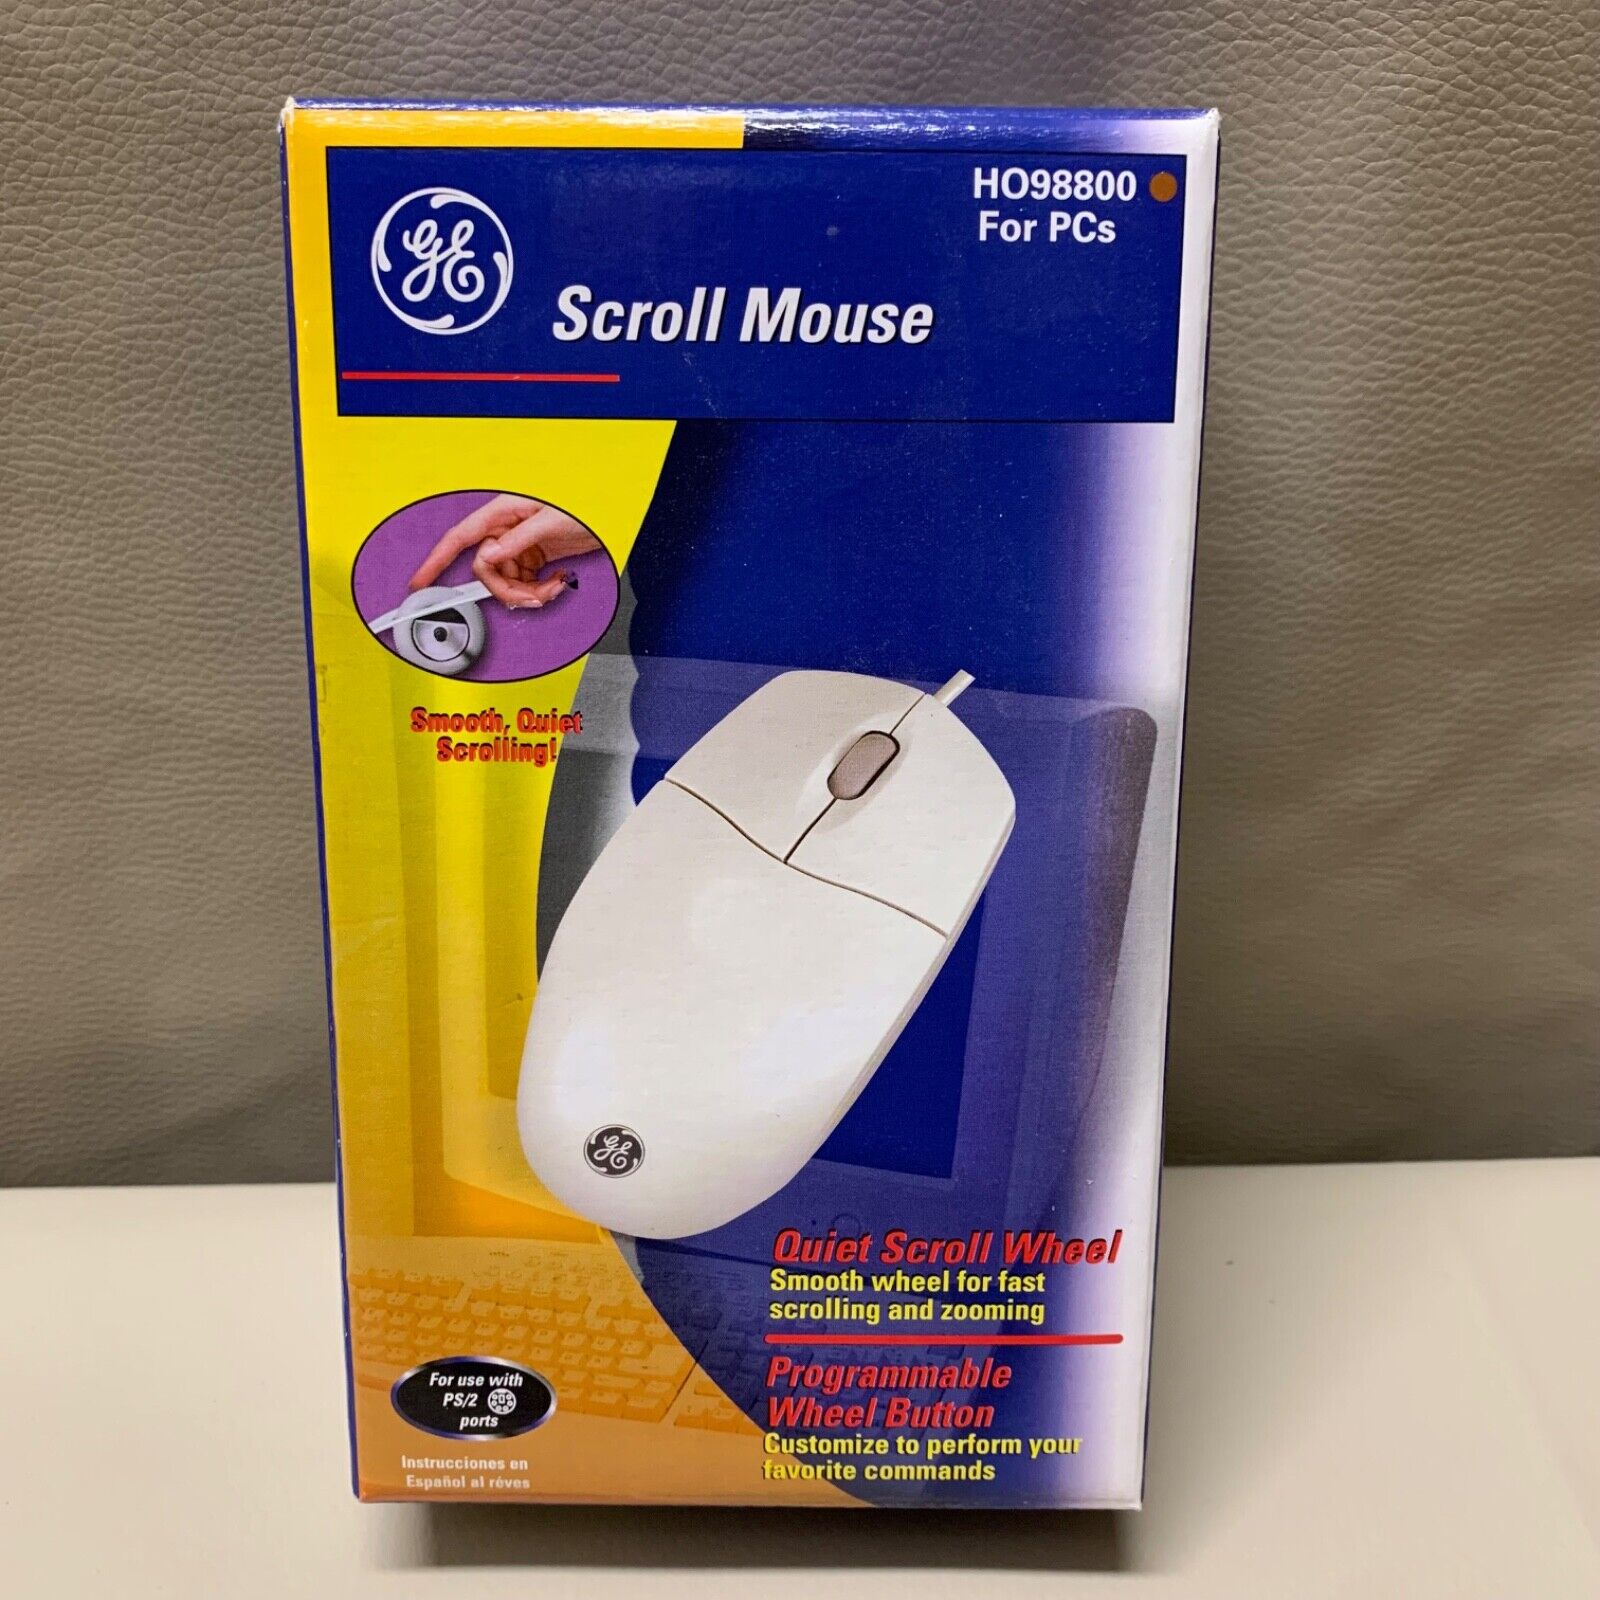 General Electric Scroll Mouse GE PS2 Model H09880 For PCs Vintage.